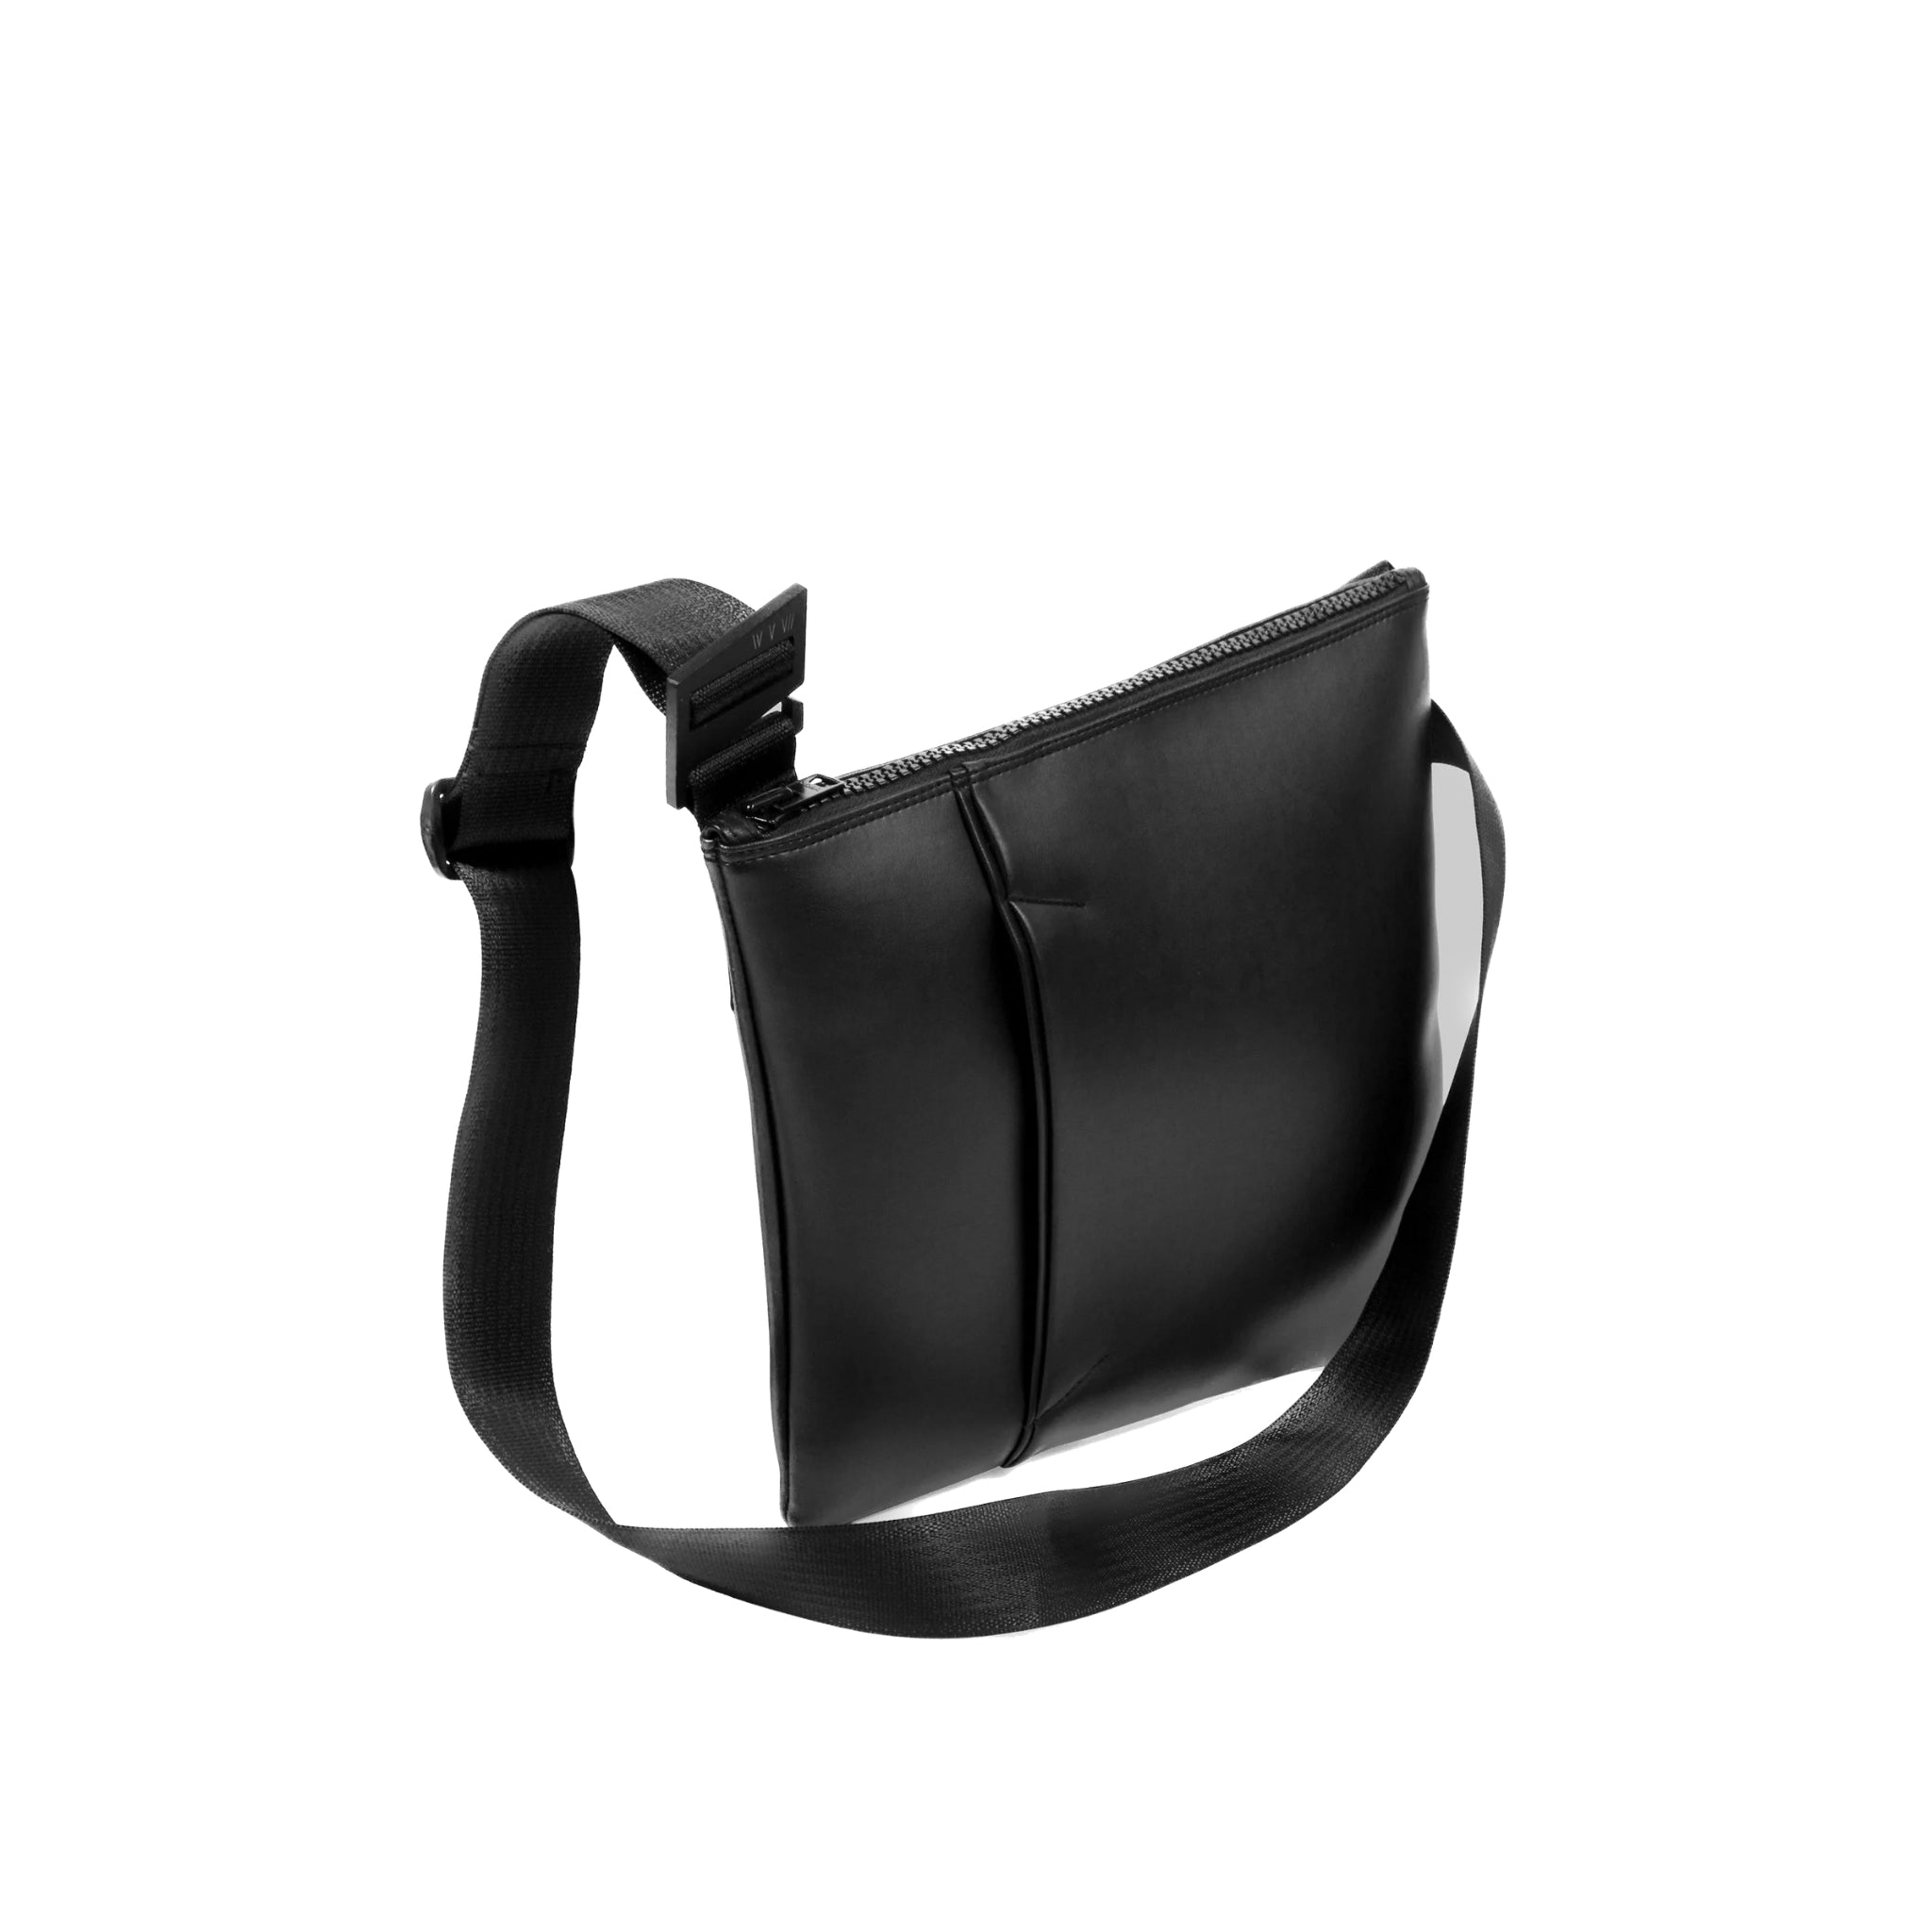 Another angle of the ANDO satchel in black vegan leather (desserto). Product shown at the front/center of a white background